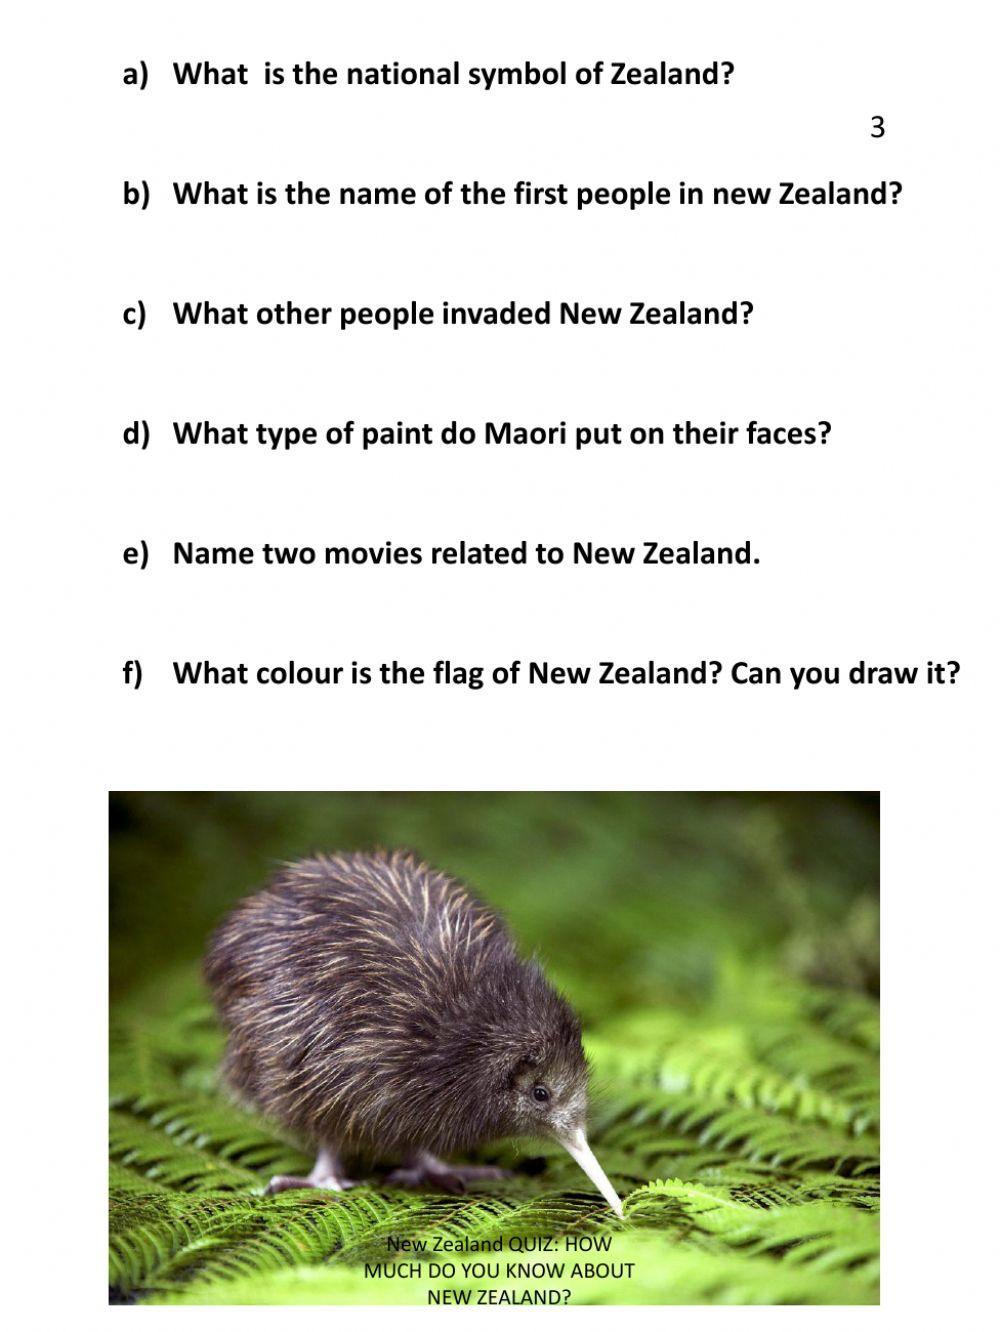 How much do you know about New Zealand?